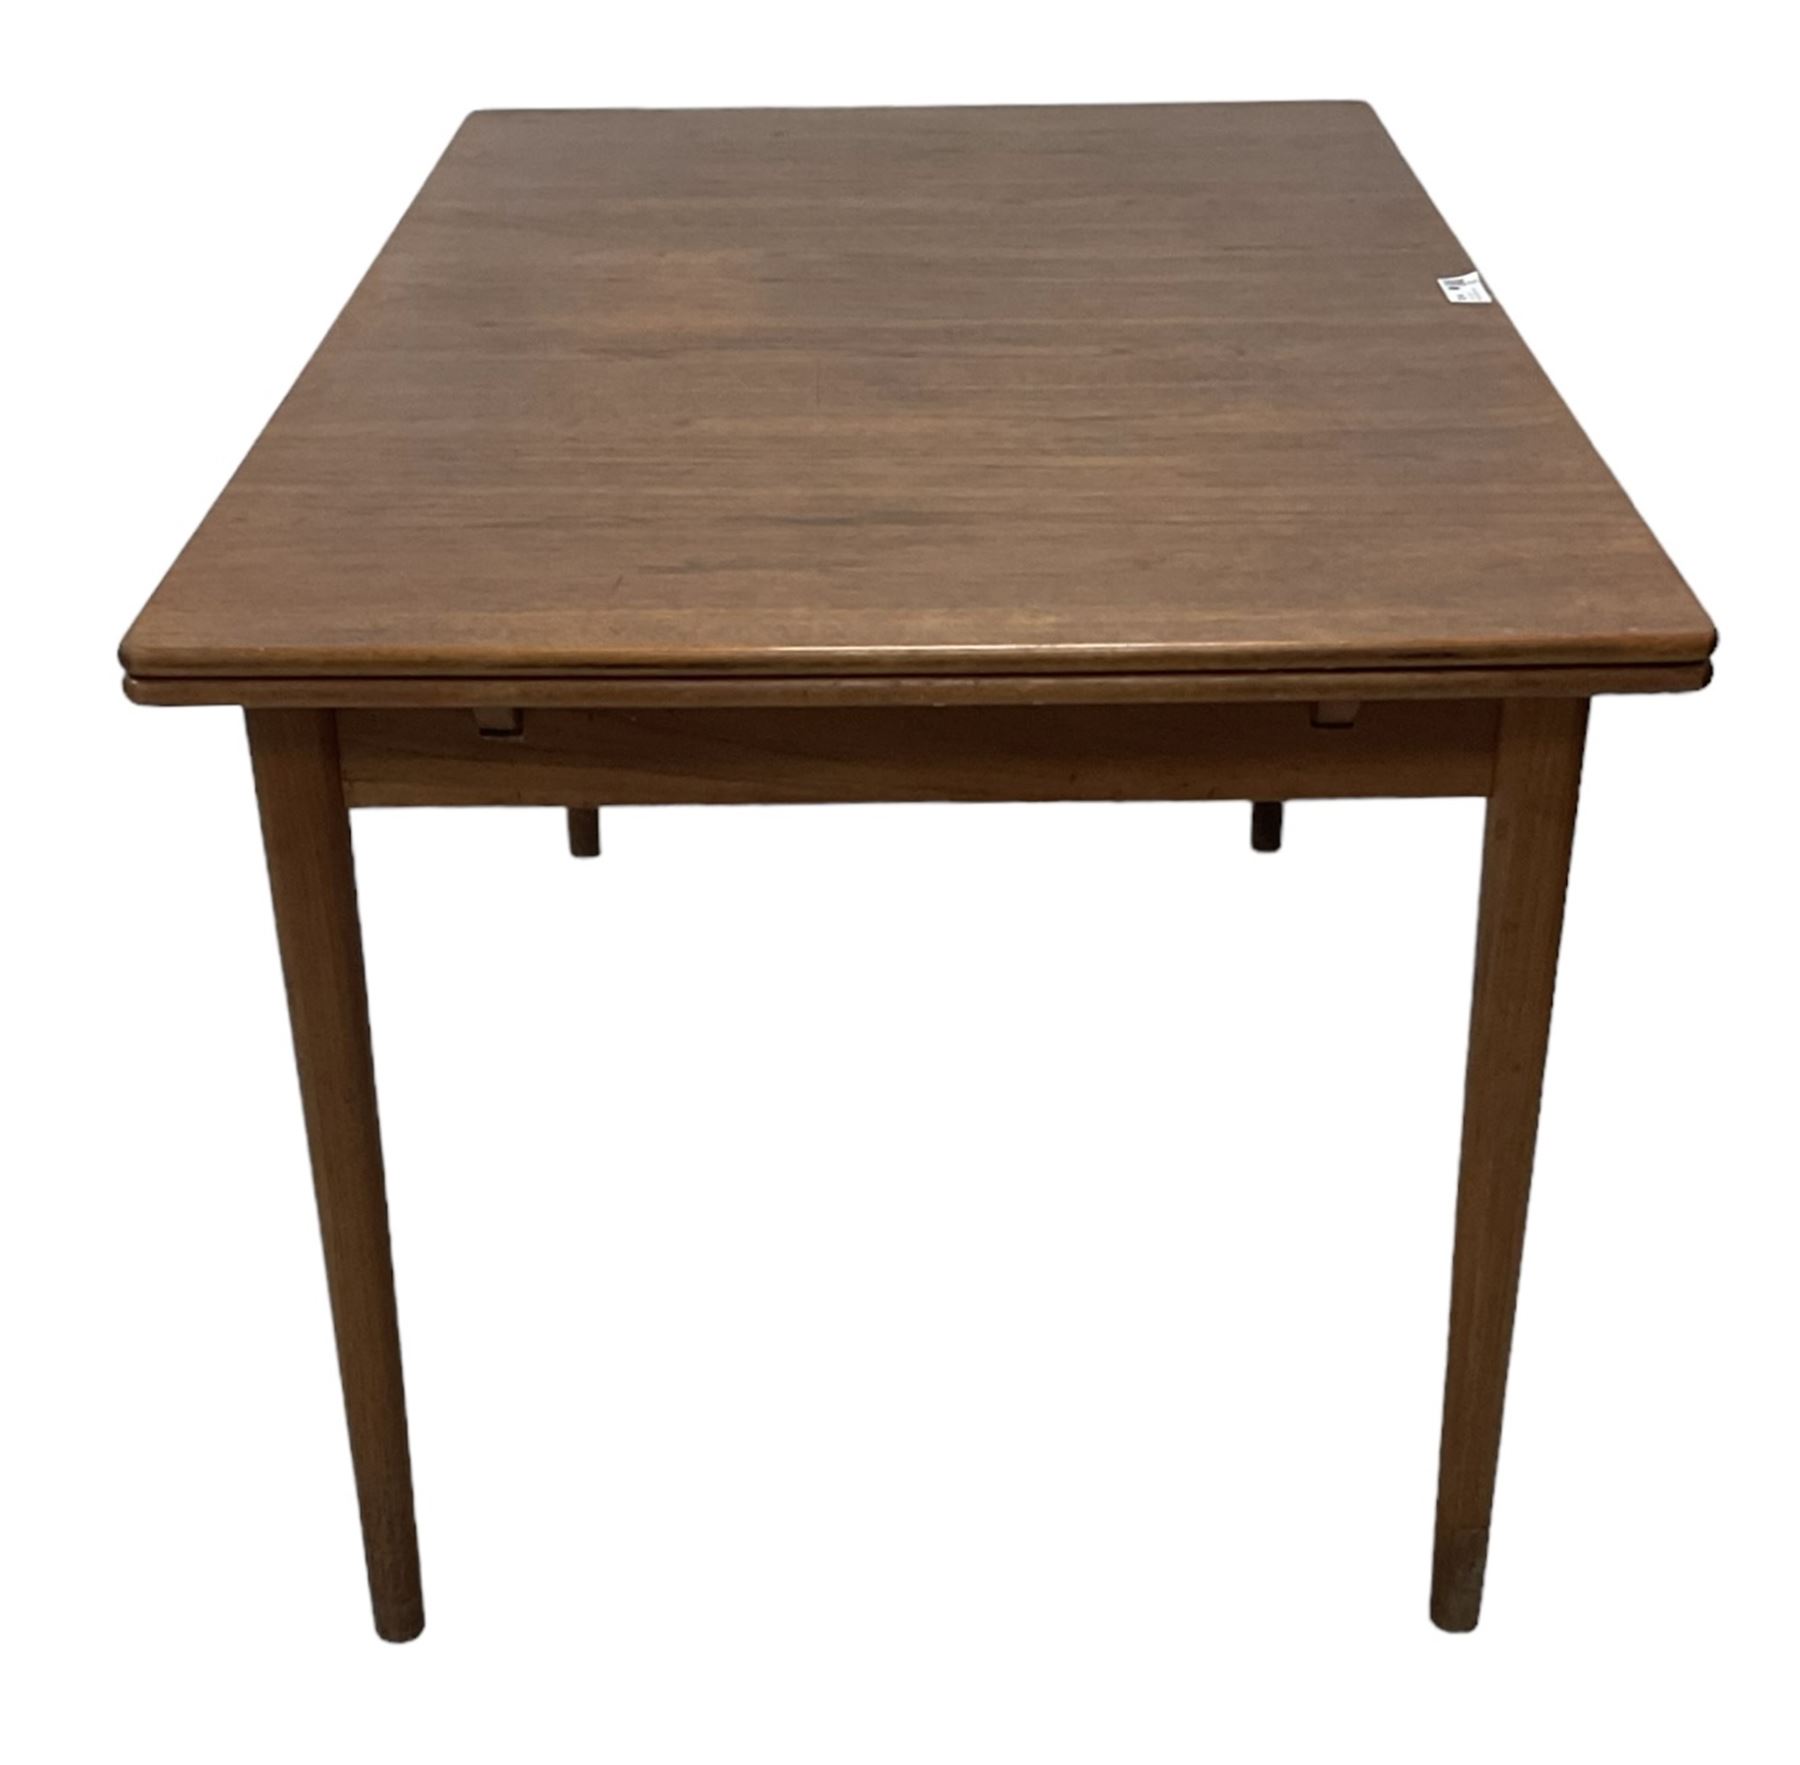 Mid-20th century teak extending draw-leaf dining table - Image 5 of 6